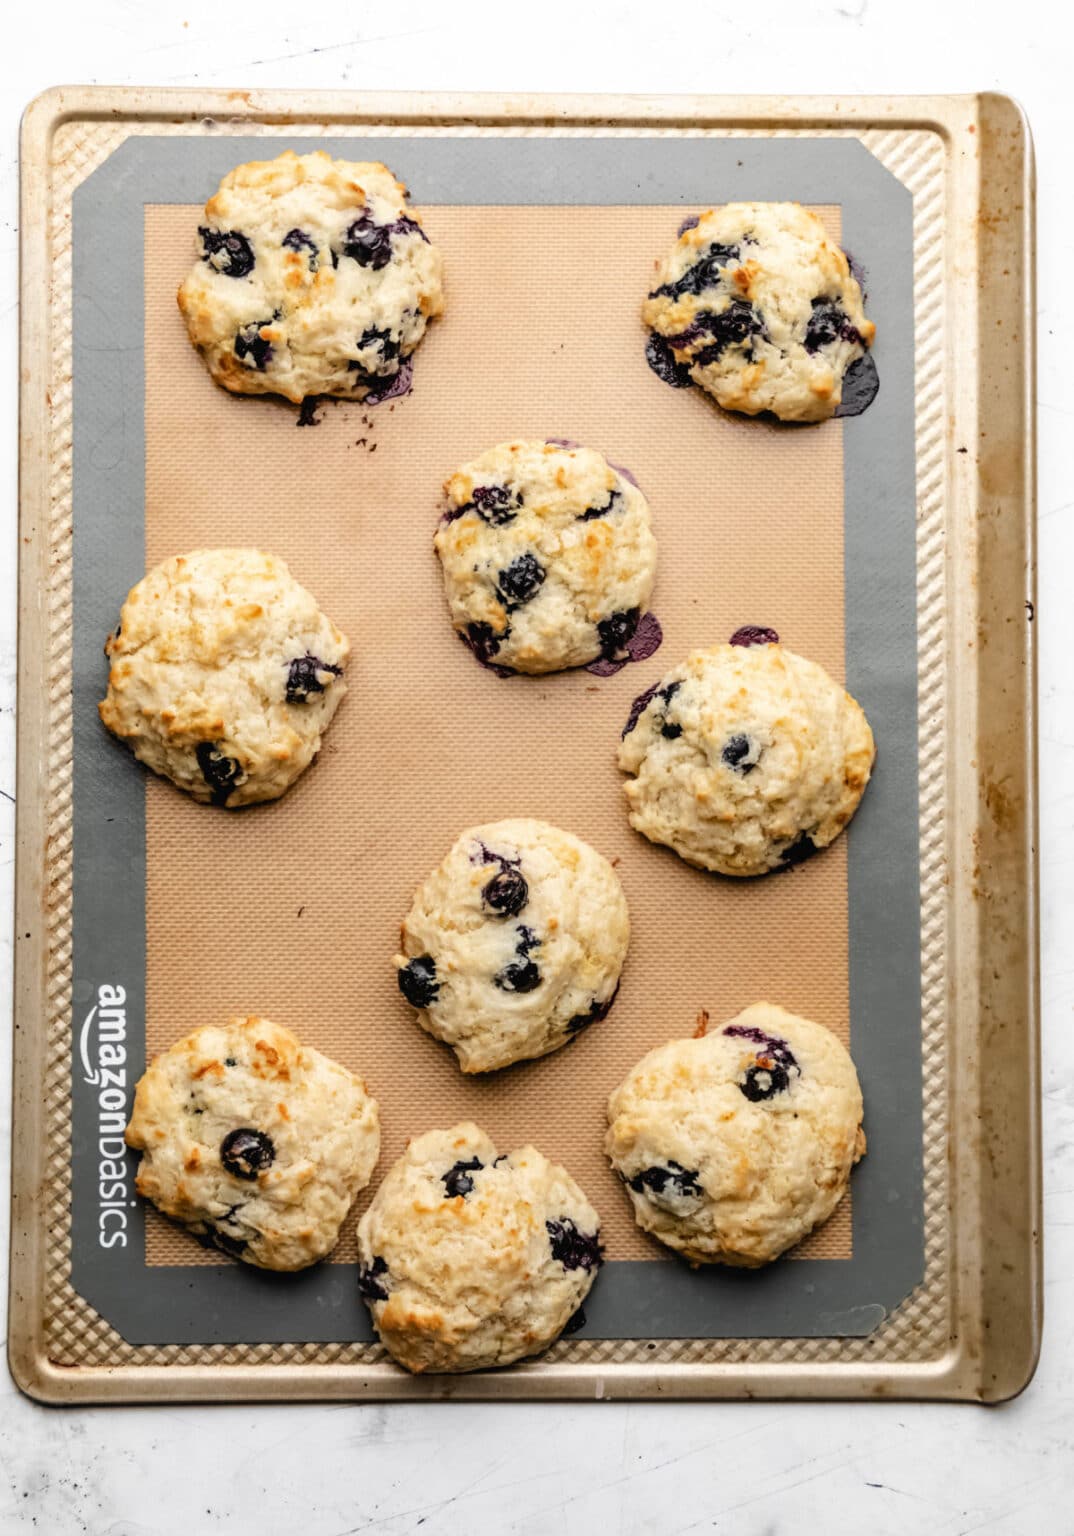 Blueberry Biscuits - I Heart Eating